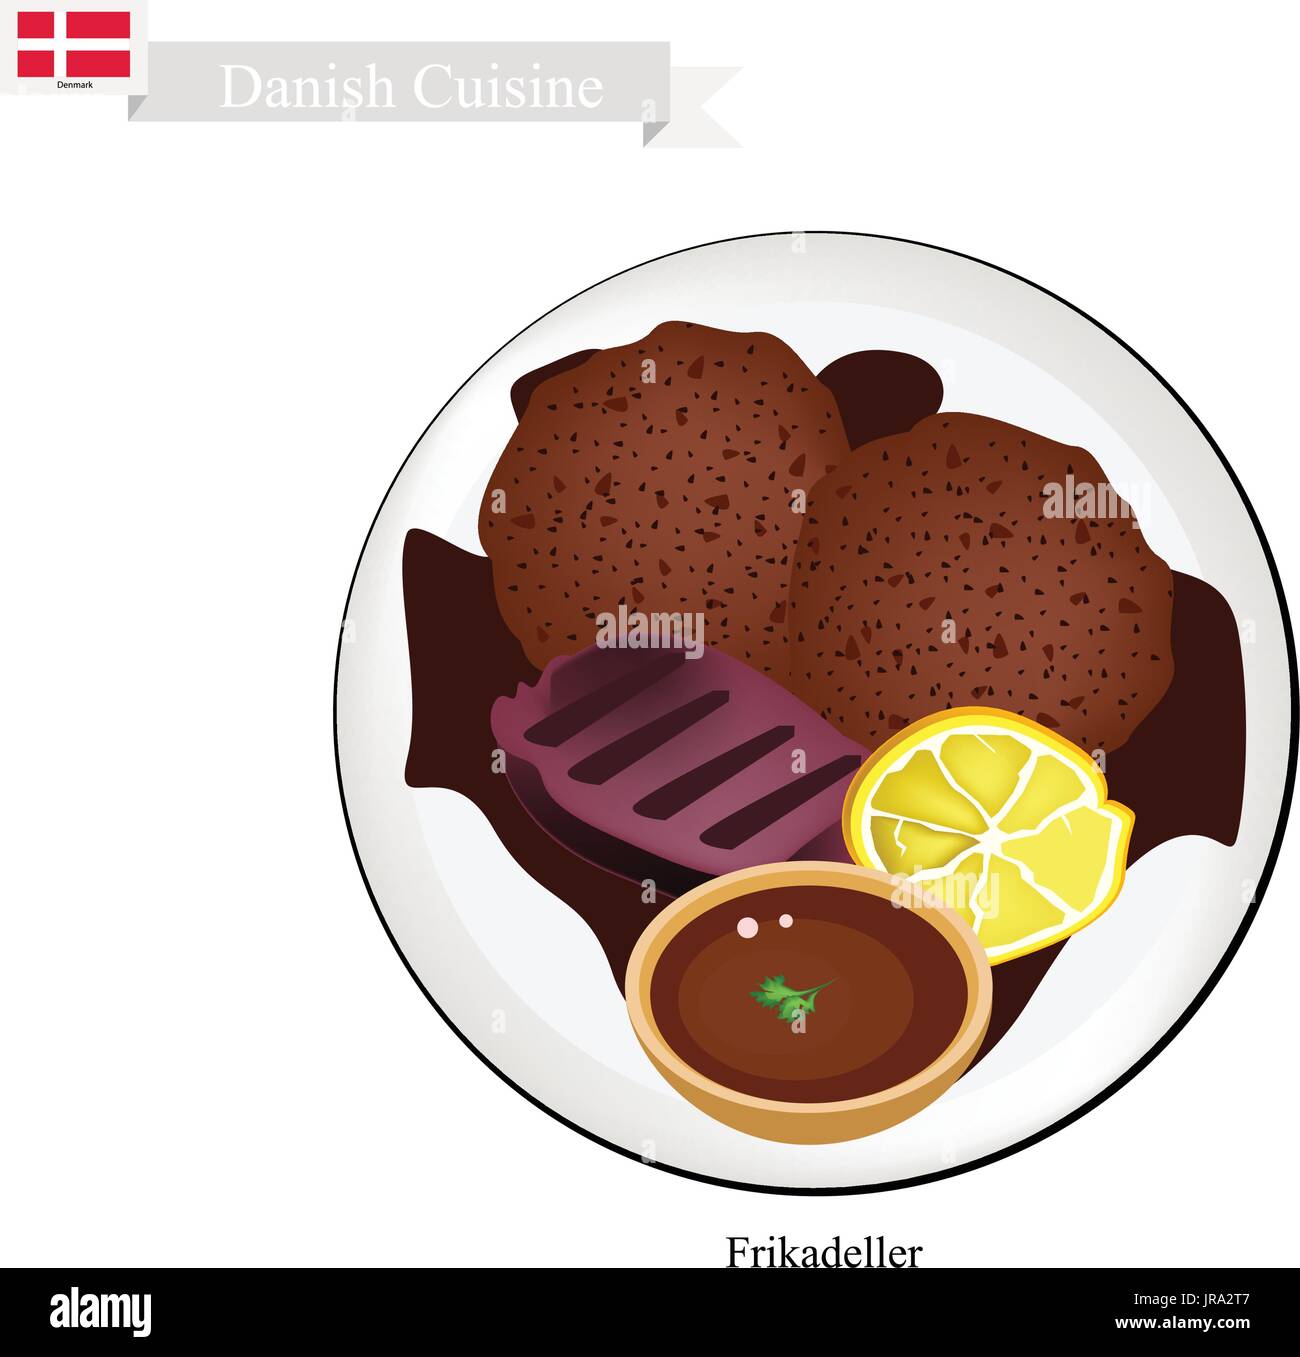 Danish Cuisine, Illustration of Frikadeller or Traditional Pan Fried Ground Beef Patty Served with Gravy and Slice Lemon. One of The Most Famous Dish  Stock Vector